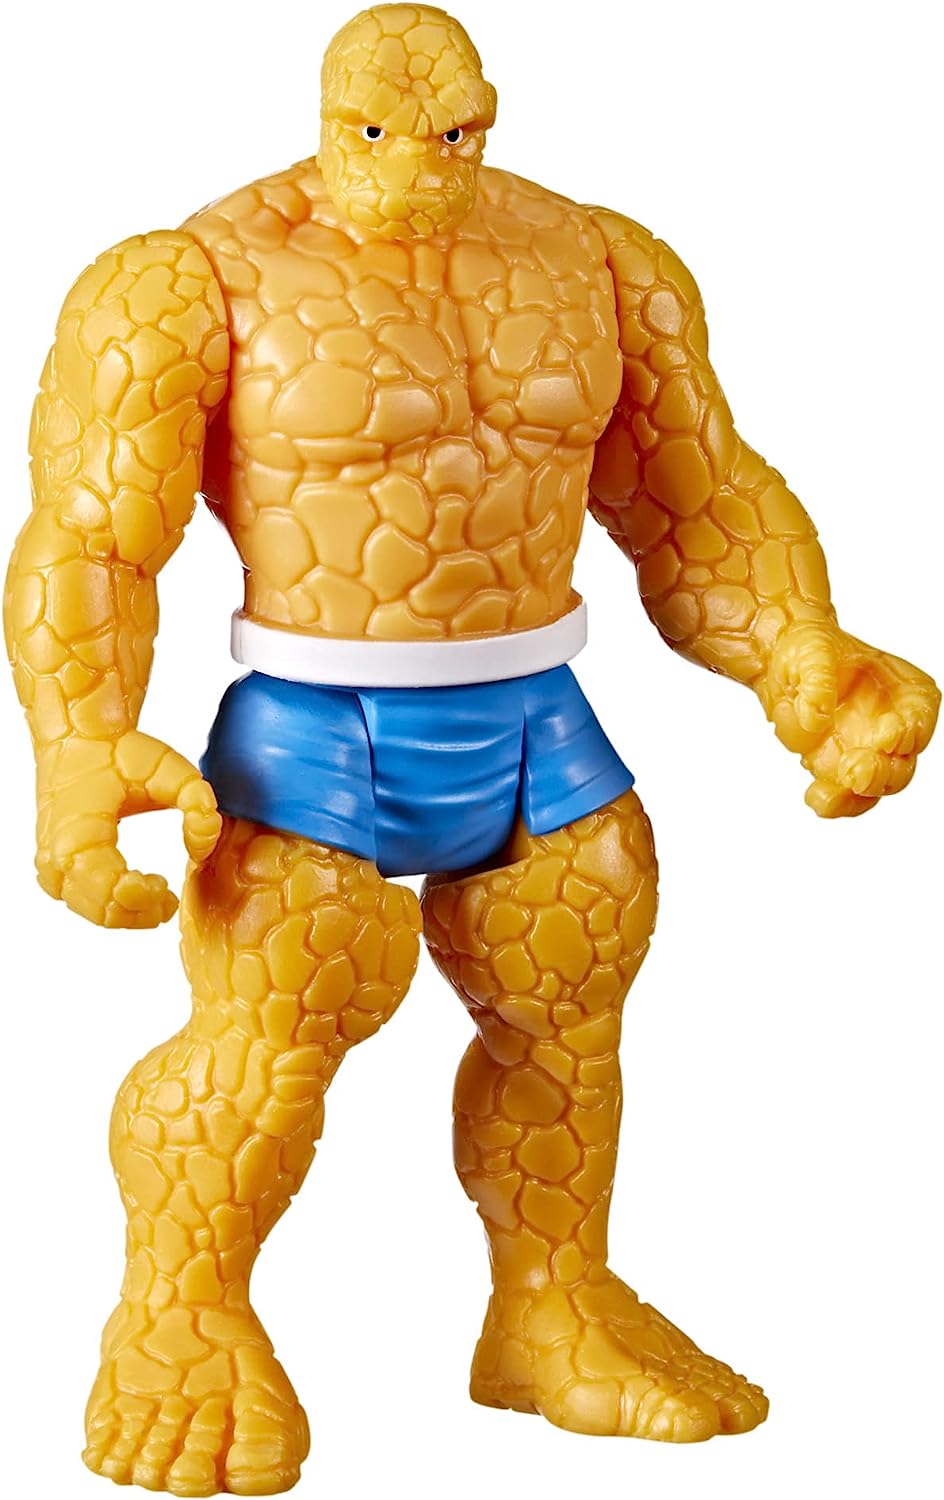 Marvel Legends Series 3.75-inch Retro 375 Collection Thing Action Figure Toy Product Image